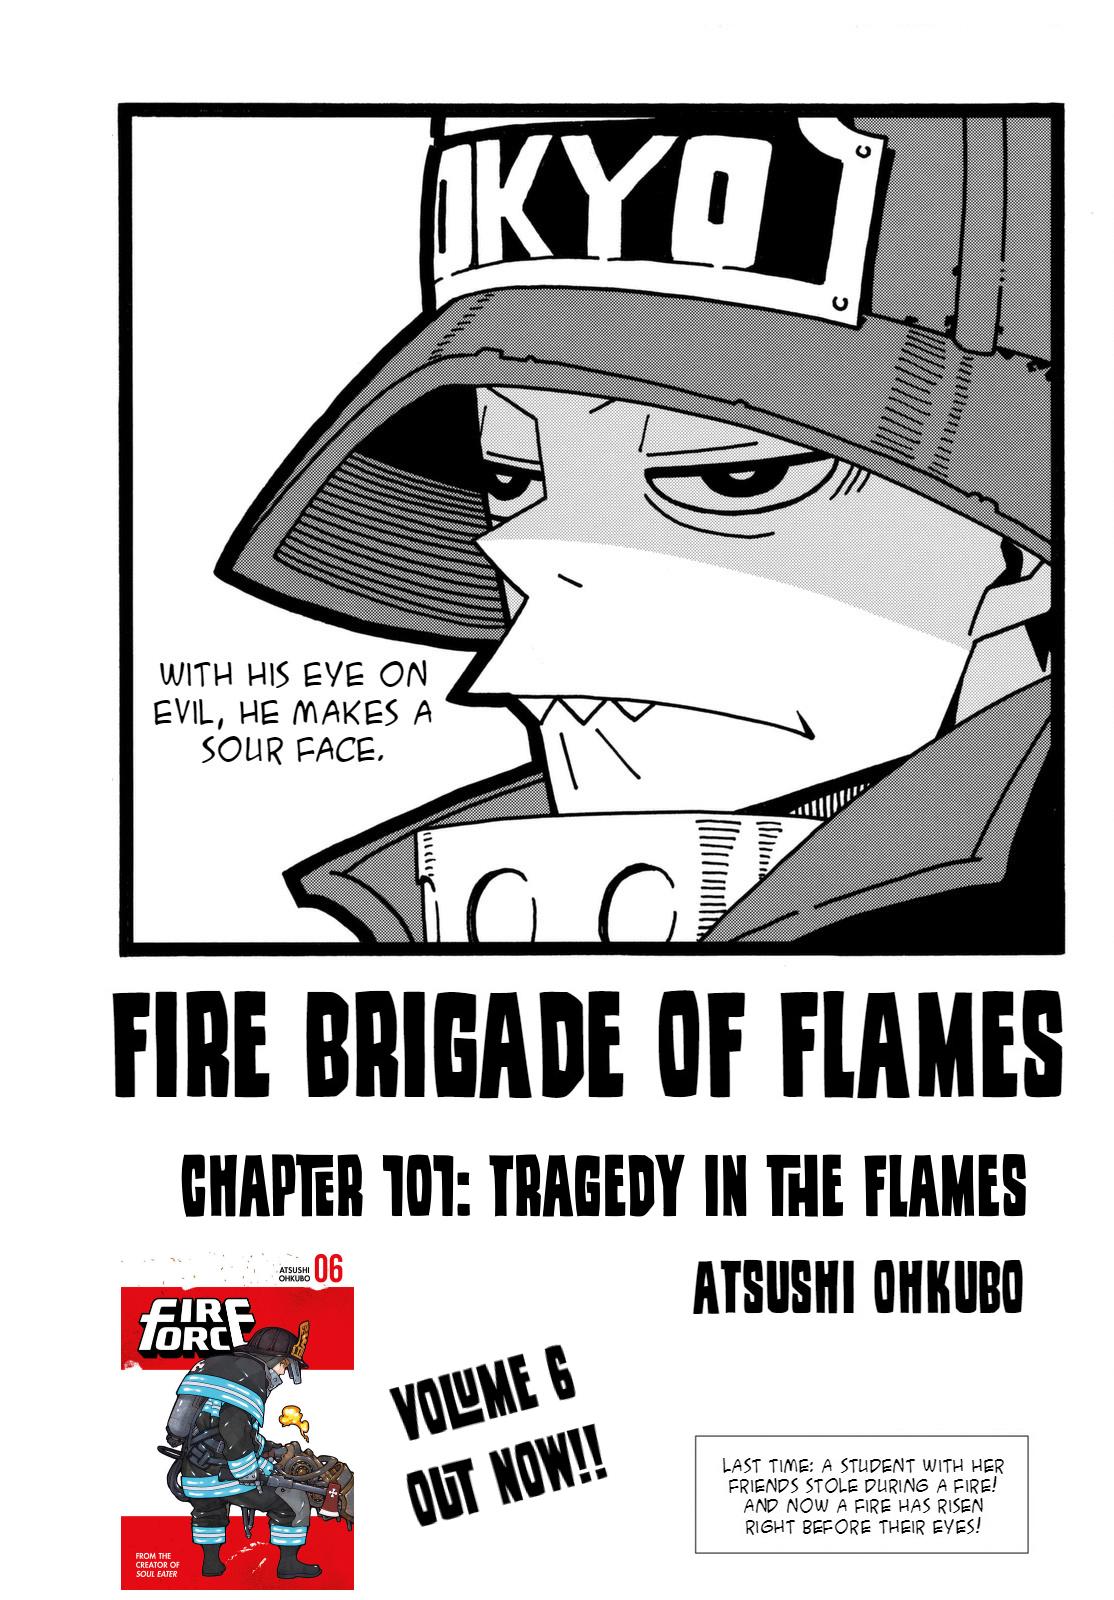 Fire Force Vol. 12 Ch. 101 Tragedy in the Flames